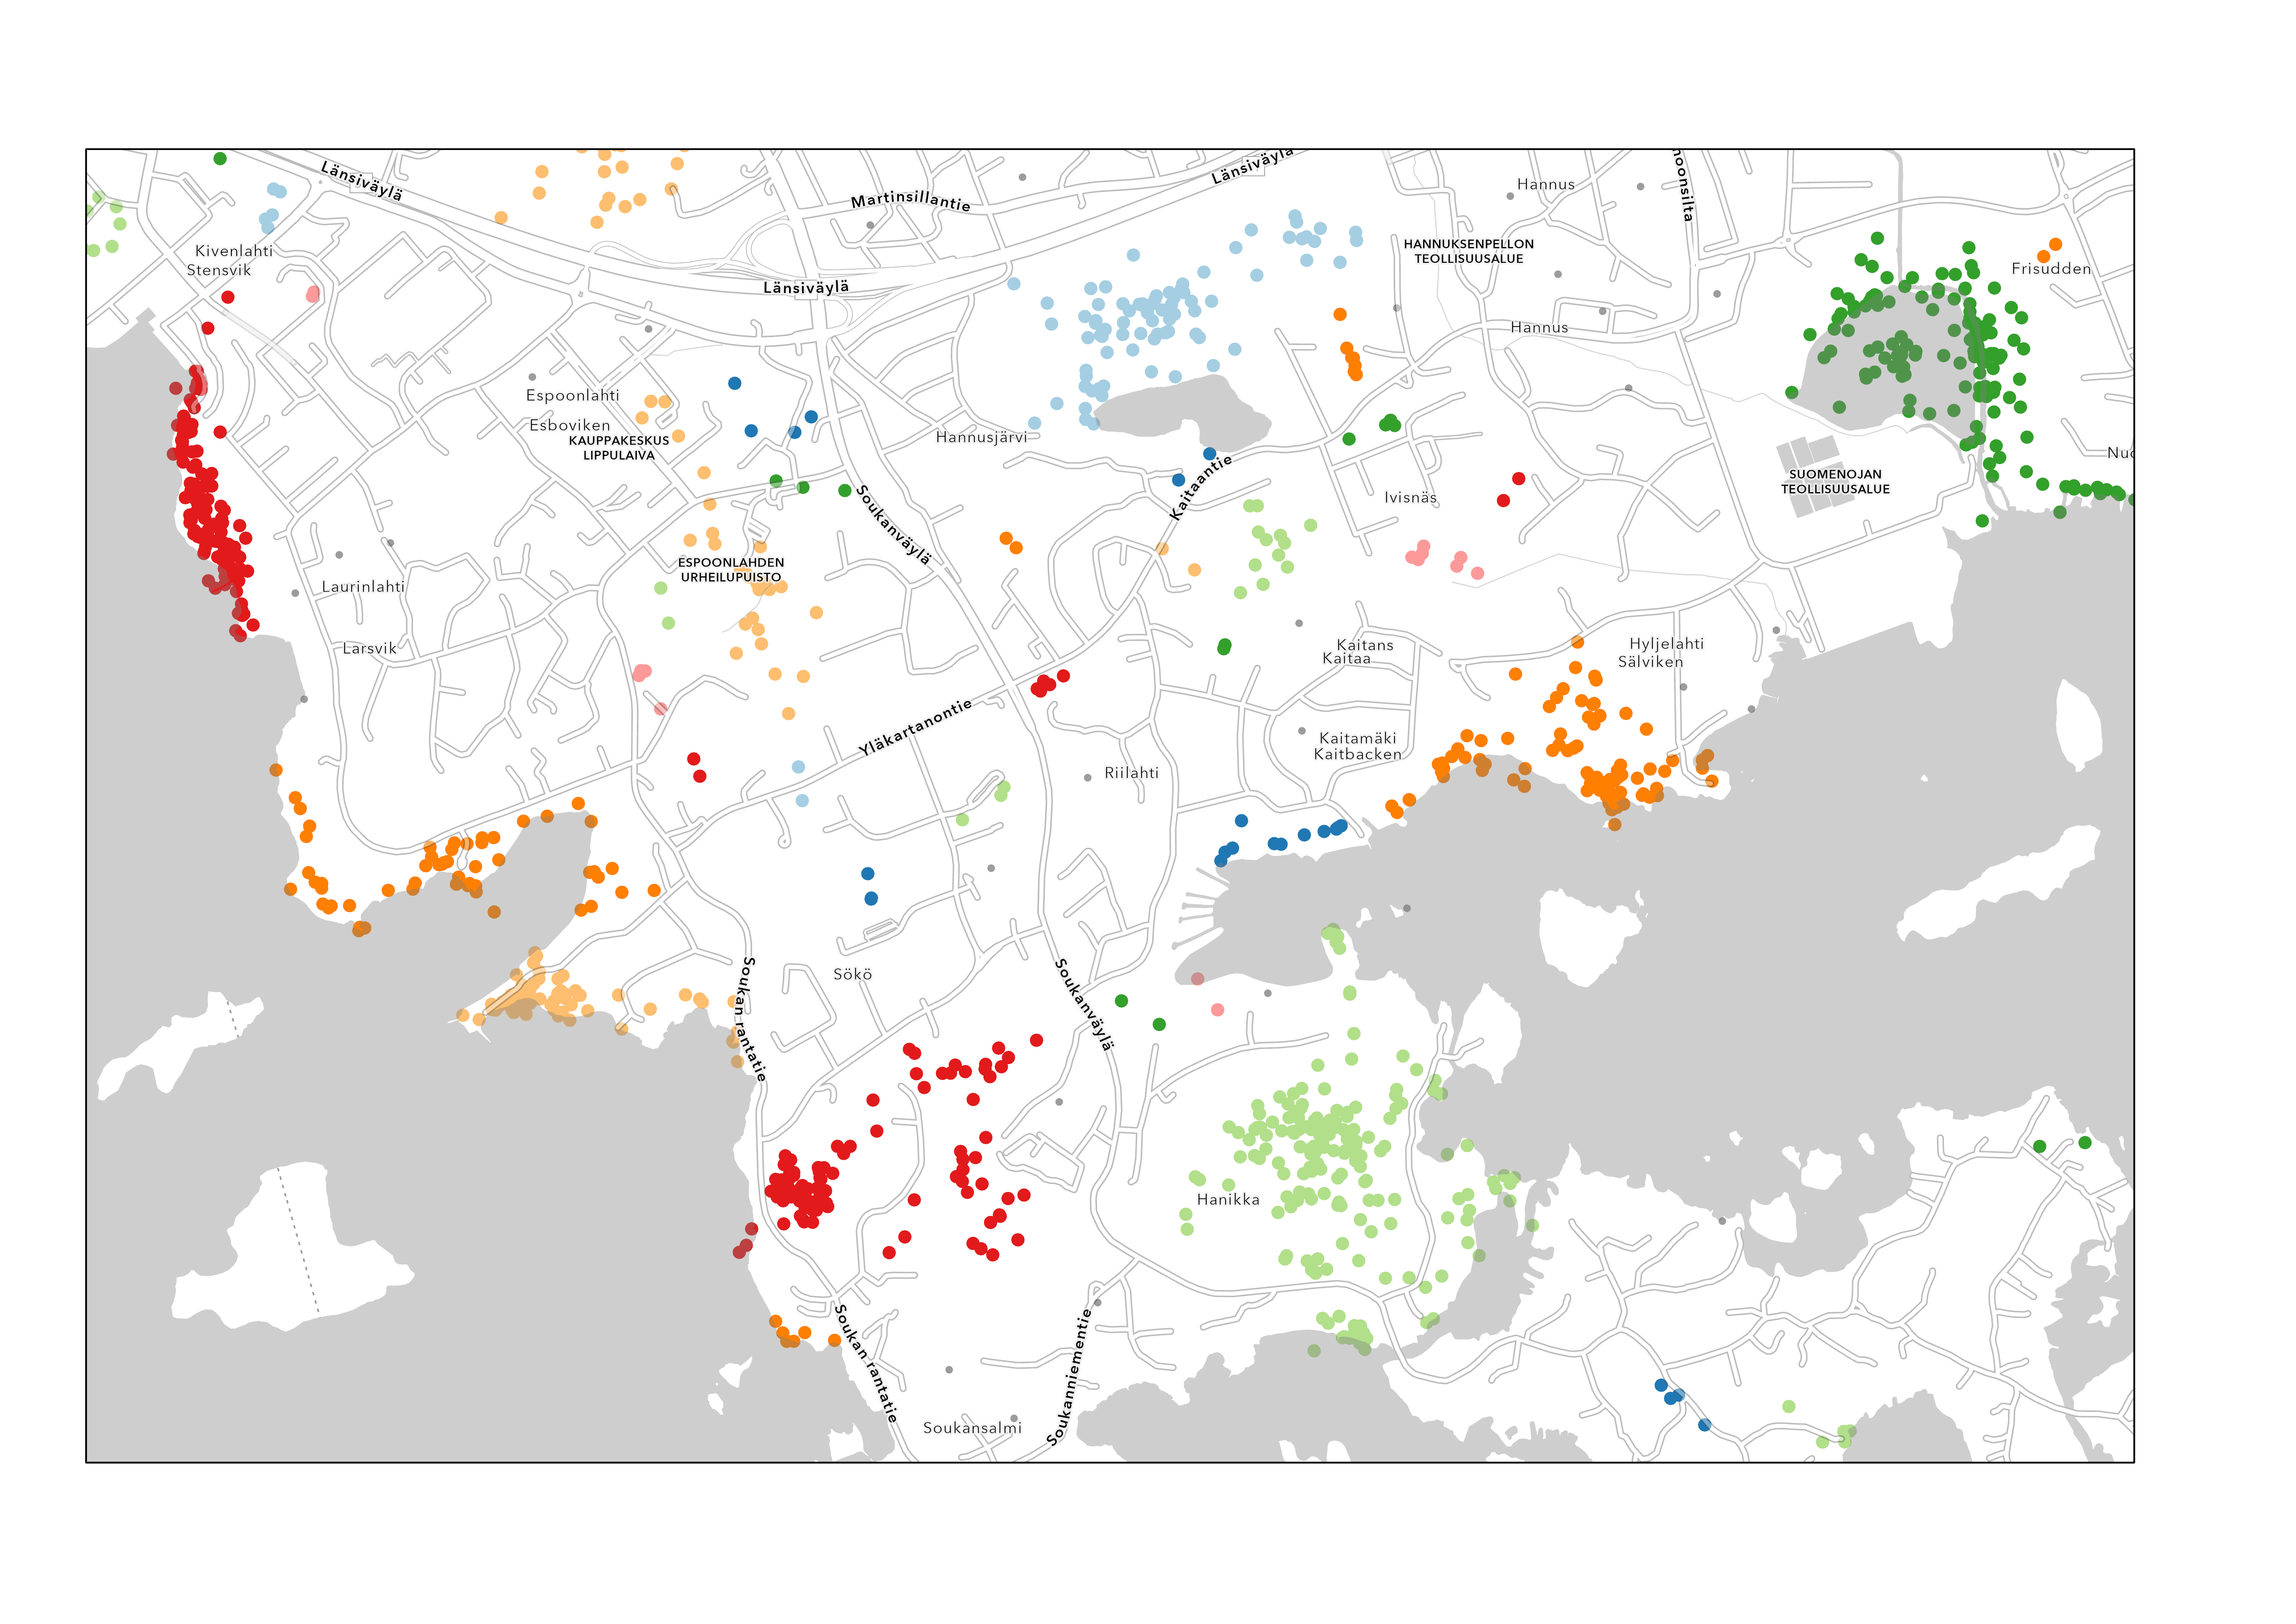 Digital mapping tools provide opportunities to capture residents' spatial practices, local knowledge, and views on how to improve the living environment. The figure portrays resident-mapped data on the recreational use of green and blue spaces in Espoo, F